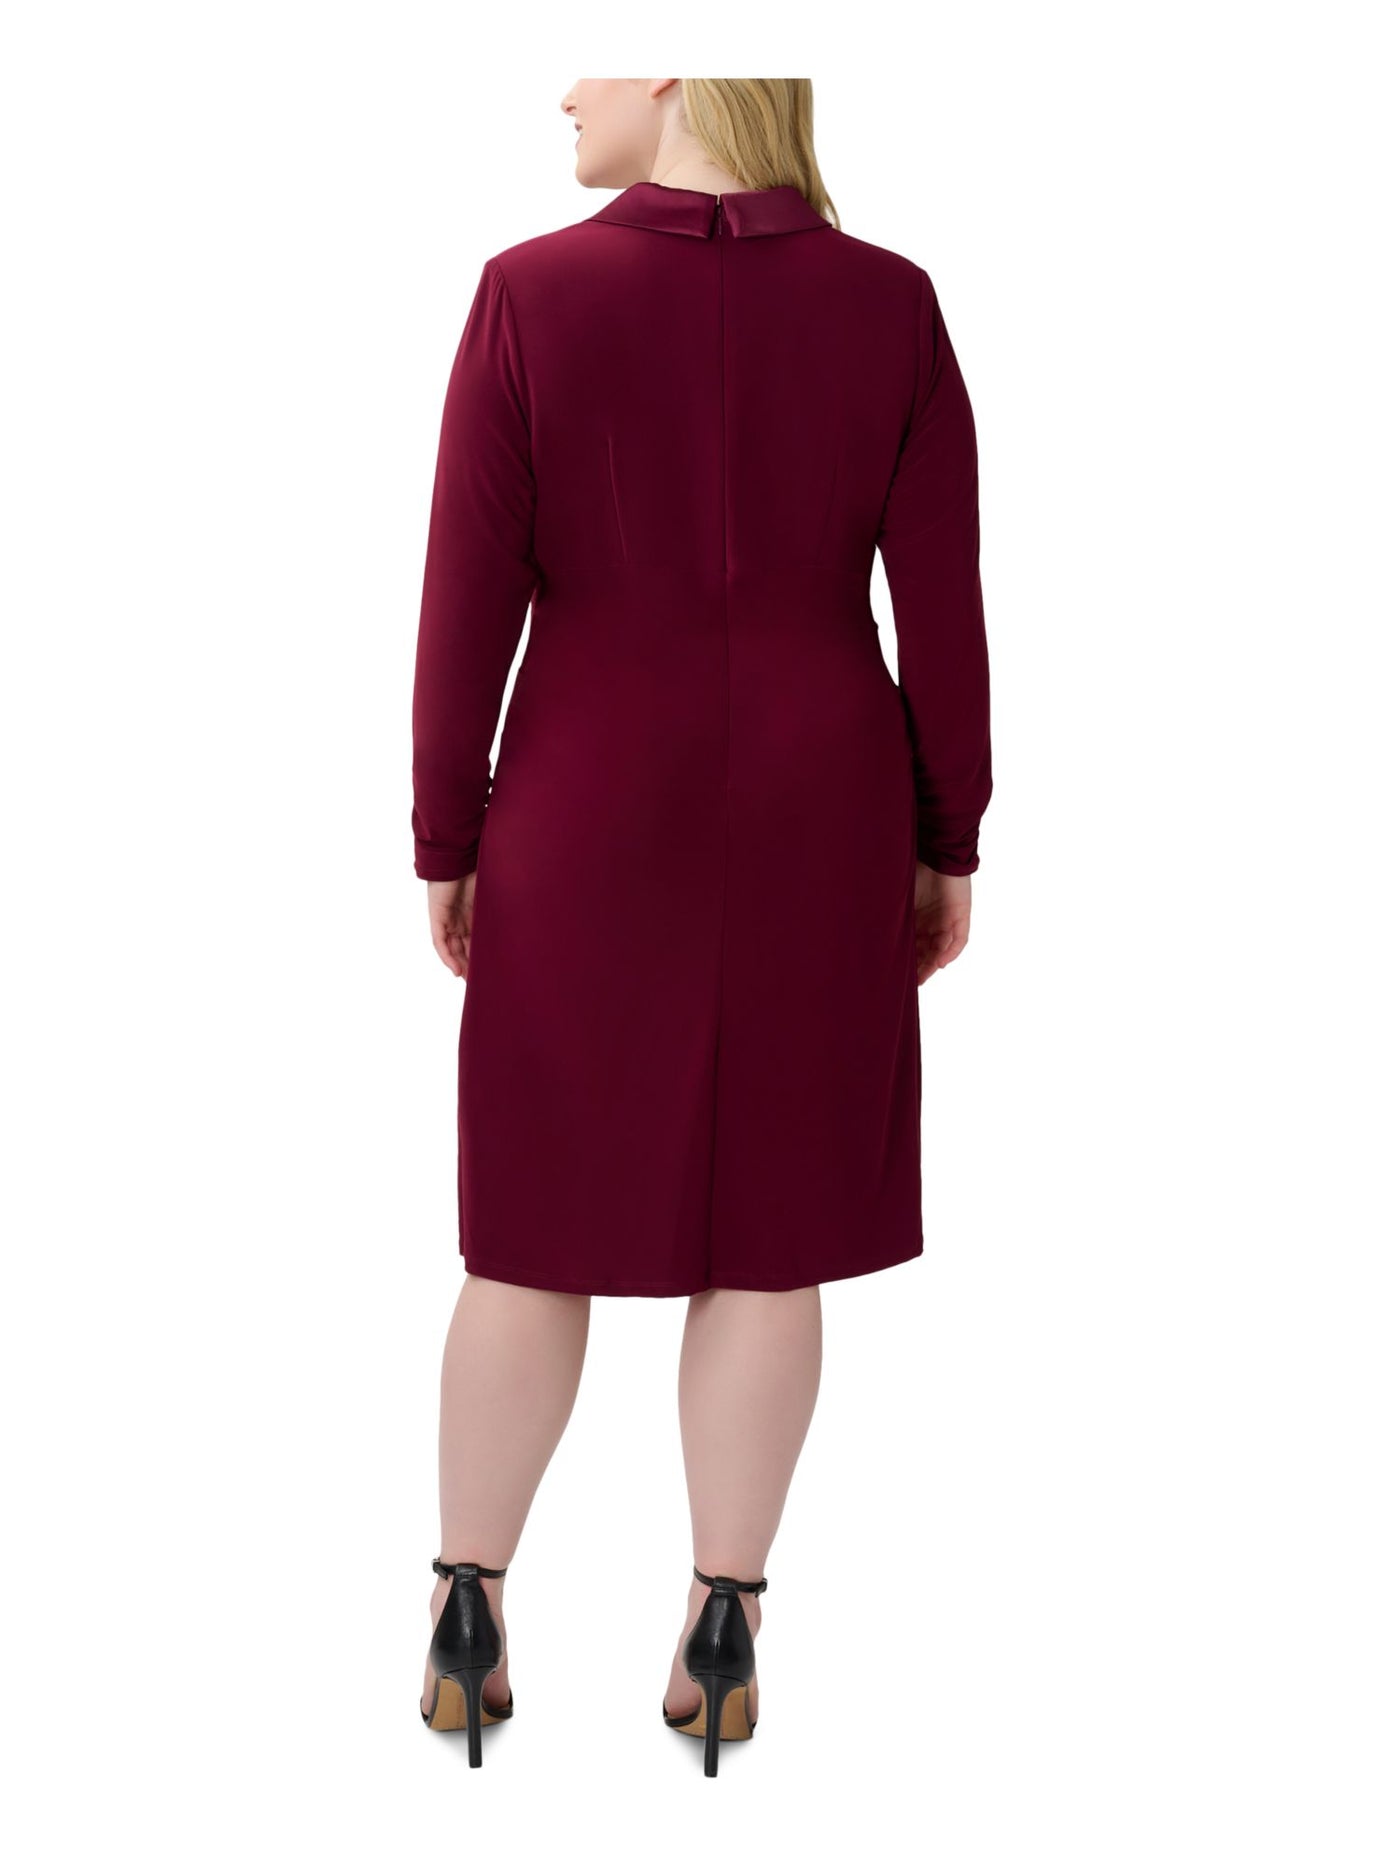 ADRIANNA PAPELL Womens Maroon Zippered Ruched Notch Collar Shoulder Pads Long Sleeve Above The Knee Wear To Work Sheath Dress Plus 22W